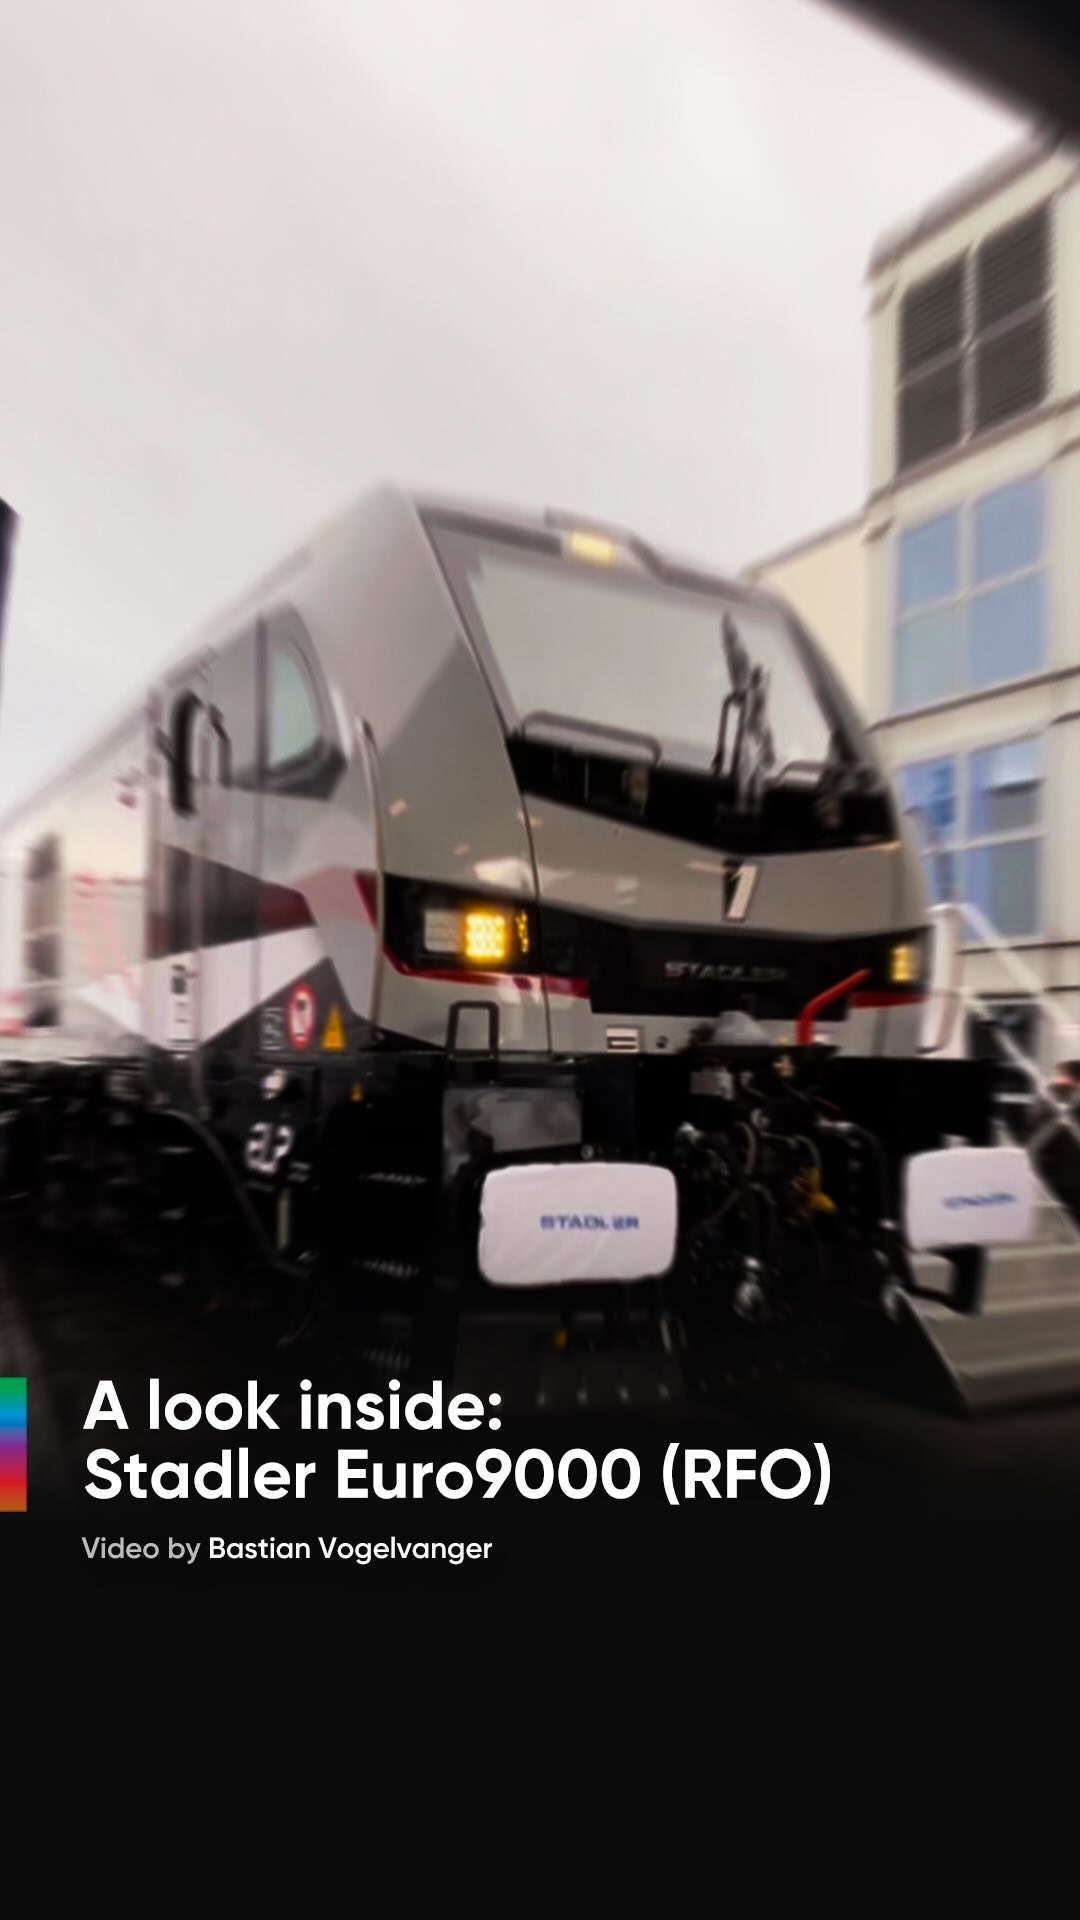 🎥 Take a look inside the Stadler Euro9000 for Rail Force One and ELP! 🇳🇱 Are you excited to see this beast in Operation? Comment down below! 🗣
.
.
.
.
#Stadler #Stadlerrail #StadlerEuro9000 #Euro9000 #CoColocomotive #electriclocomotive #ellok #Railforceone #RFO #RFO9000 #ELP #Europeanlocpool #railways #locomotive #railways_of_our_world #railways_of_europe #Innotrans #Innotrans2022 #reel #trainreels #trainreel